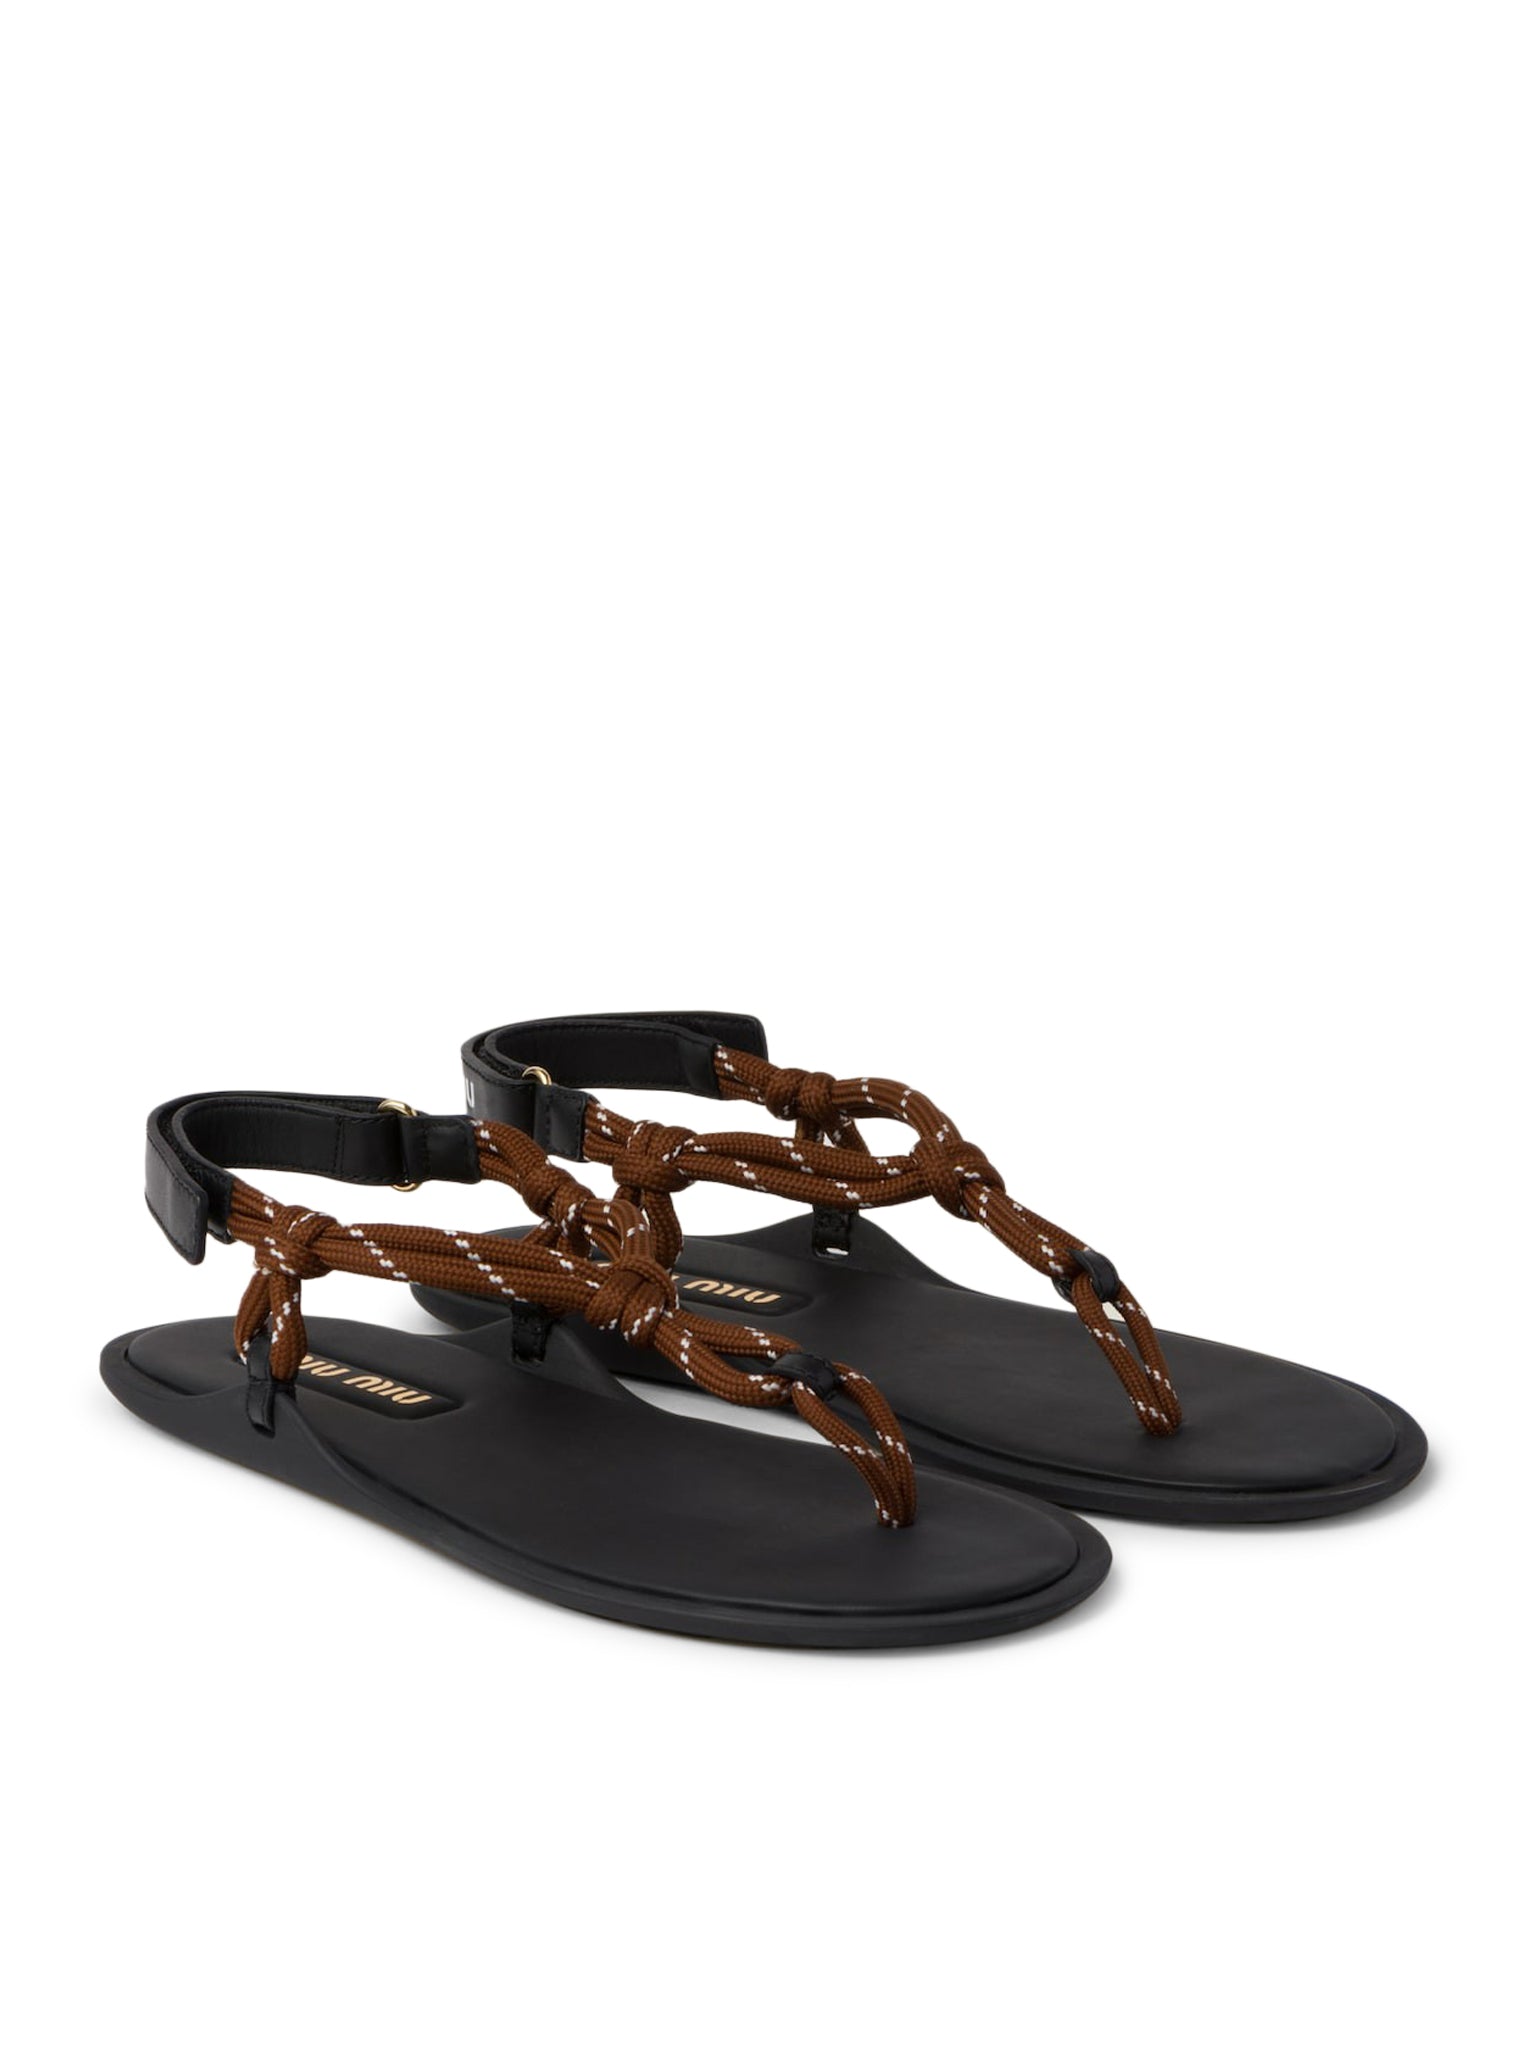 Riviere sandals in rope and leather